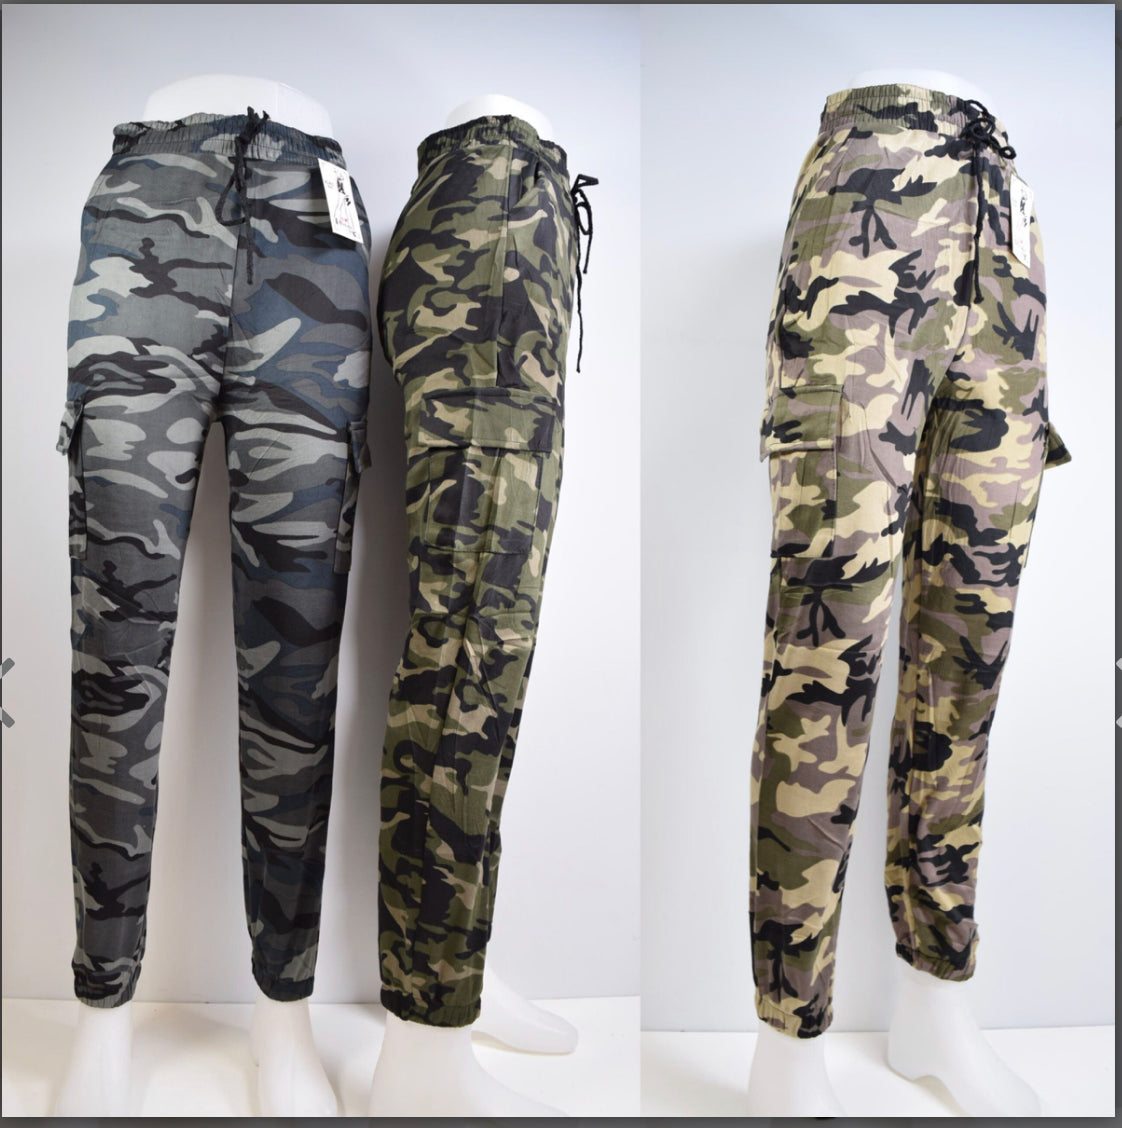 Fleece jogging pants with military pattern (x12)